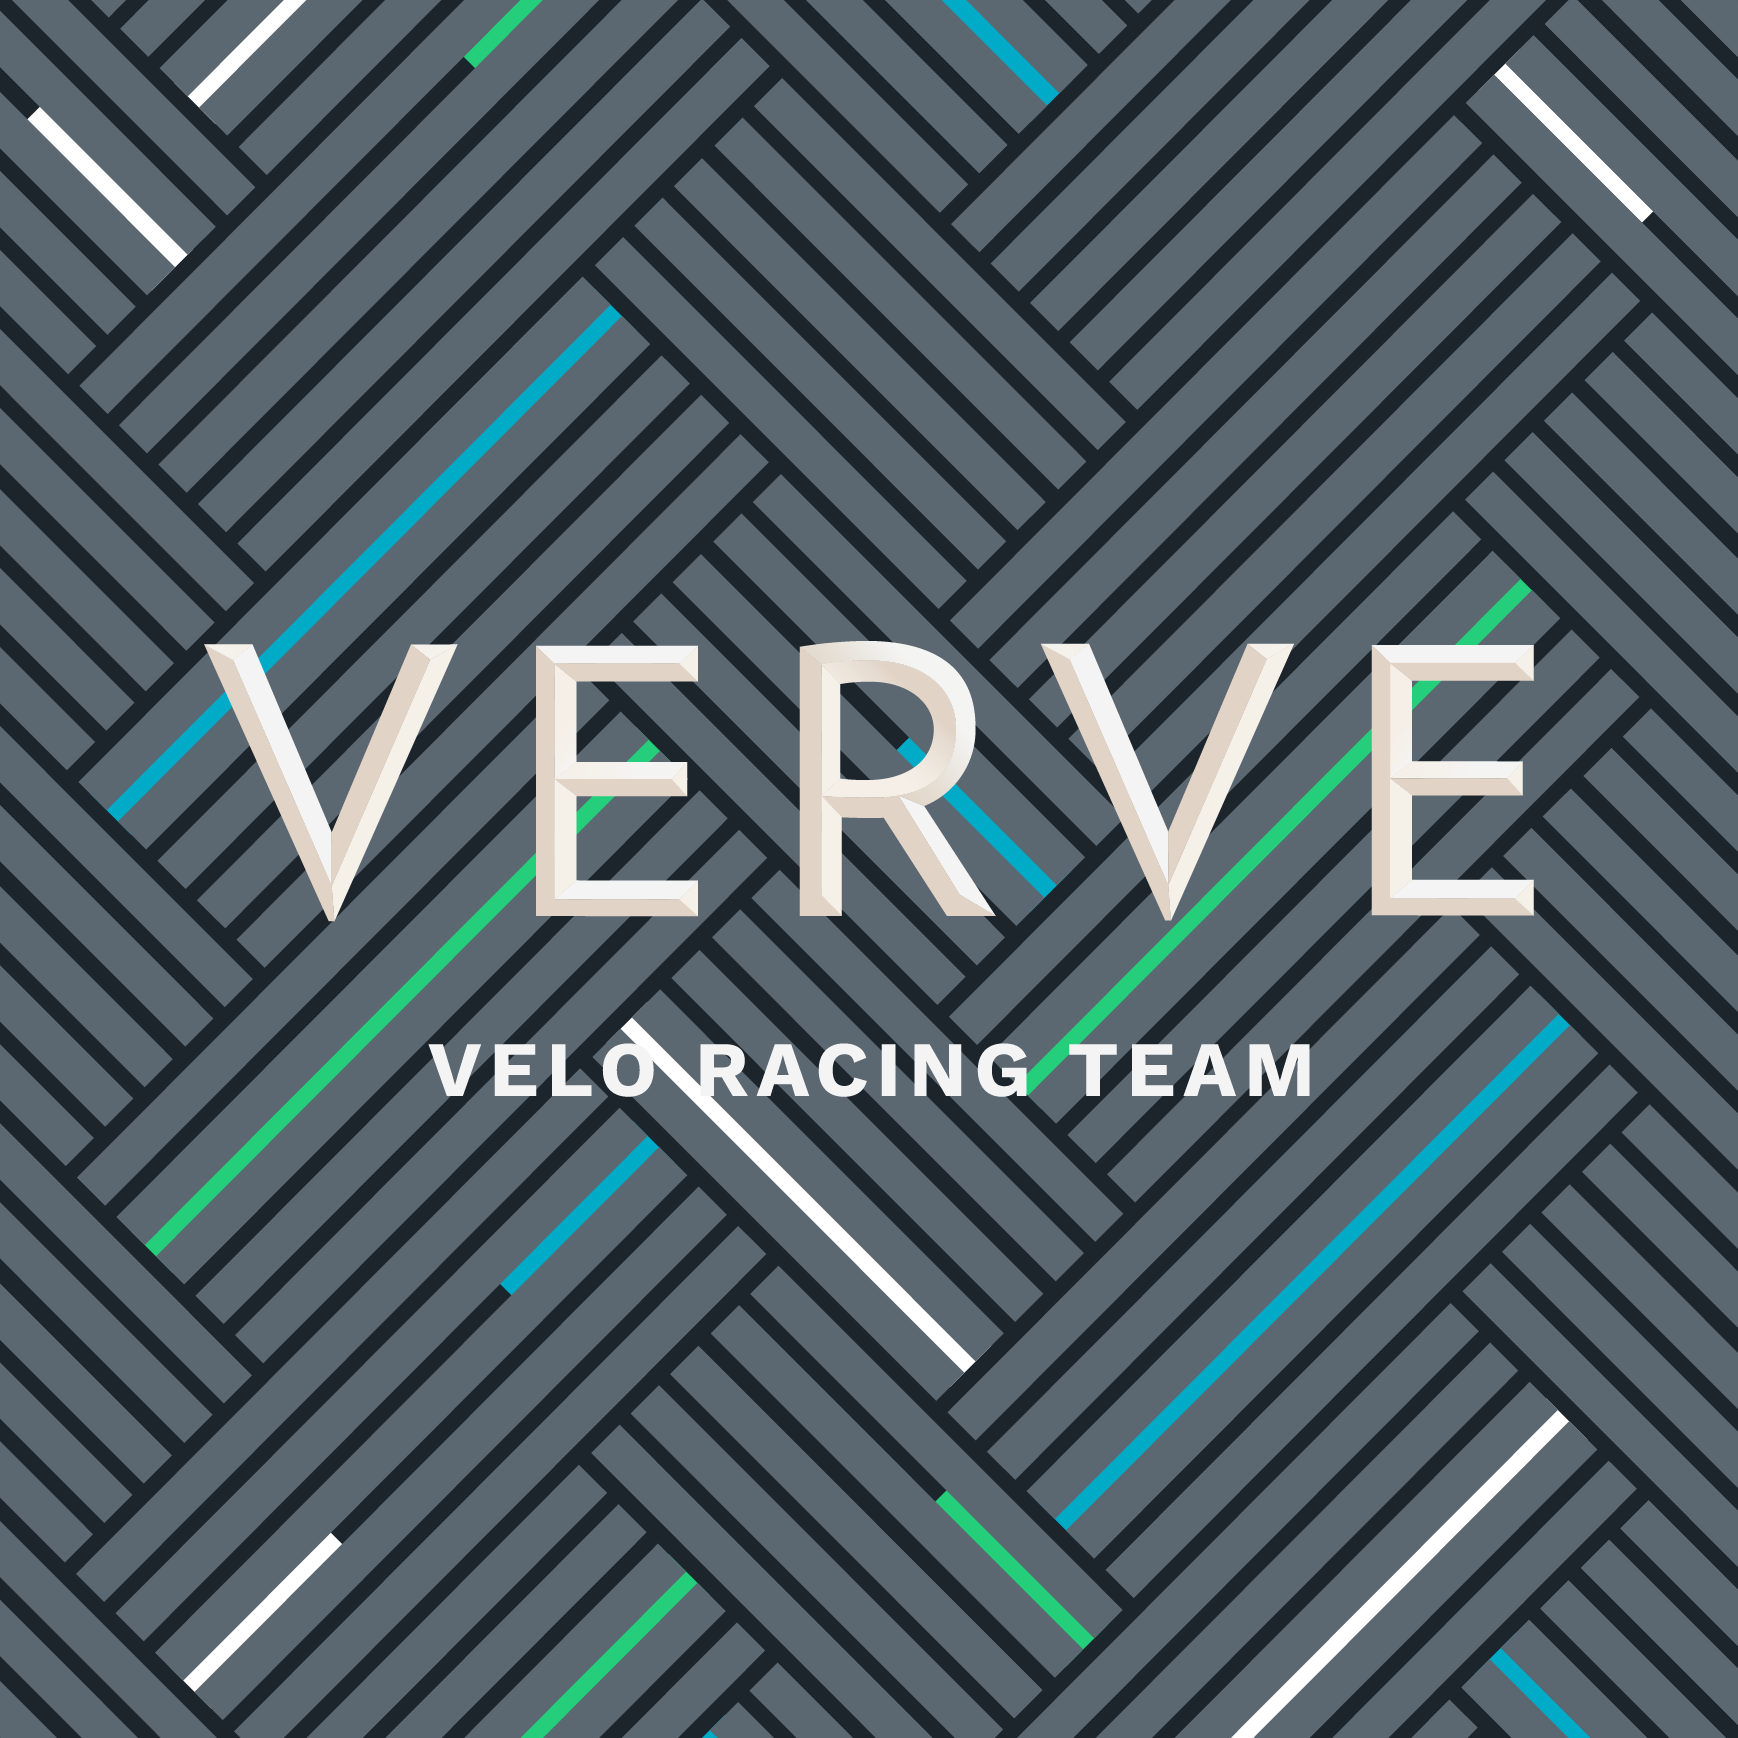 Club Image for VERVE VELO RACING TEAM